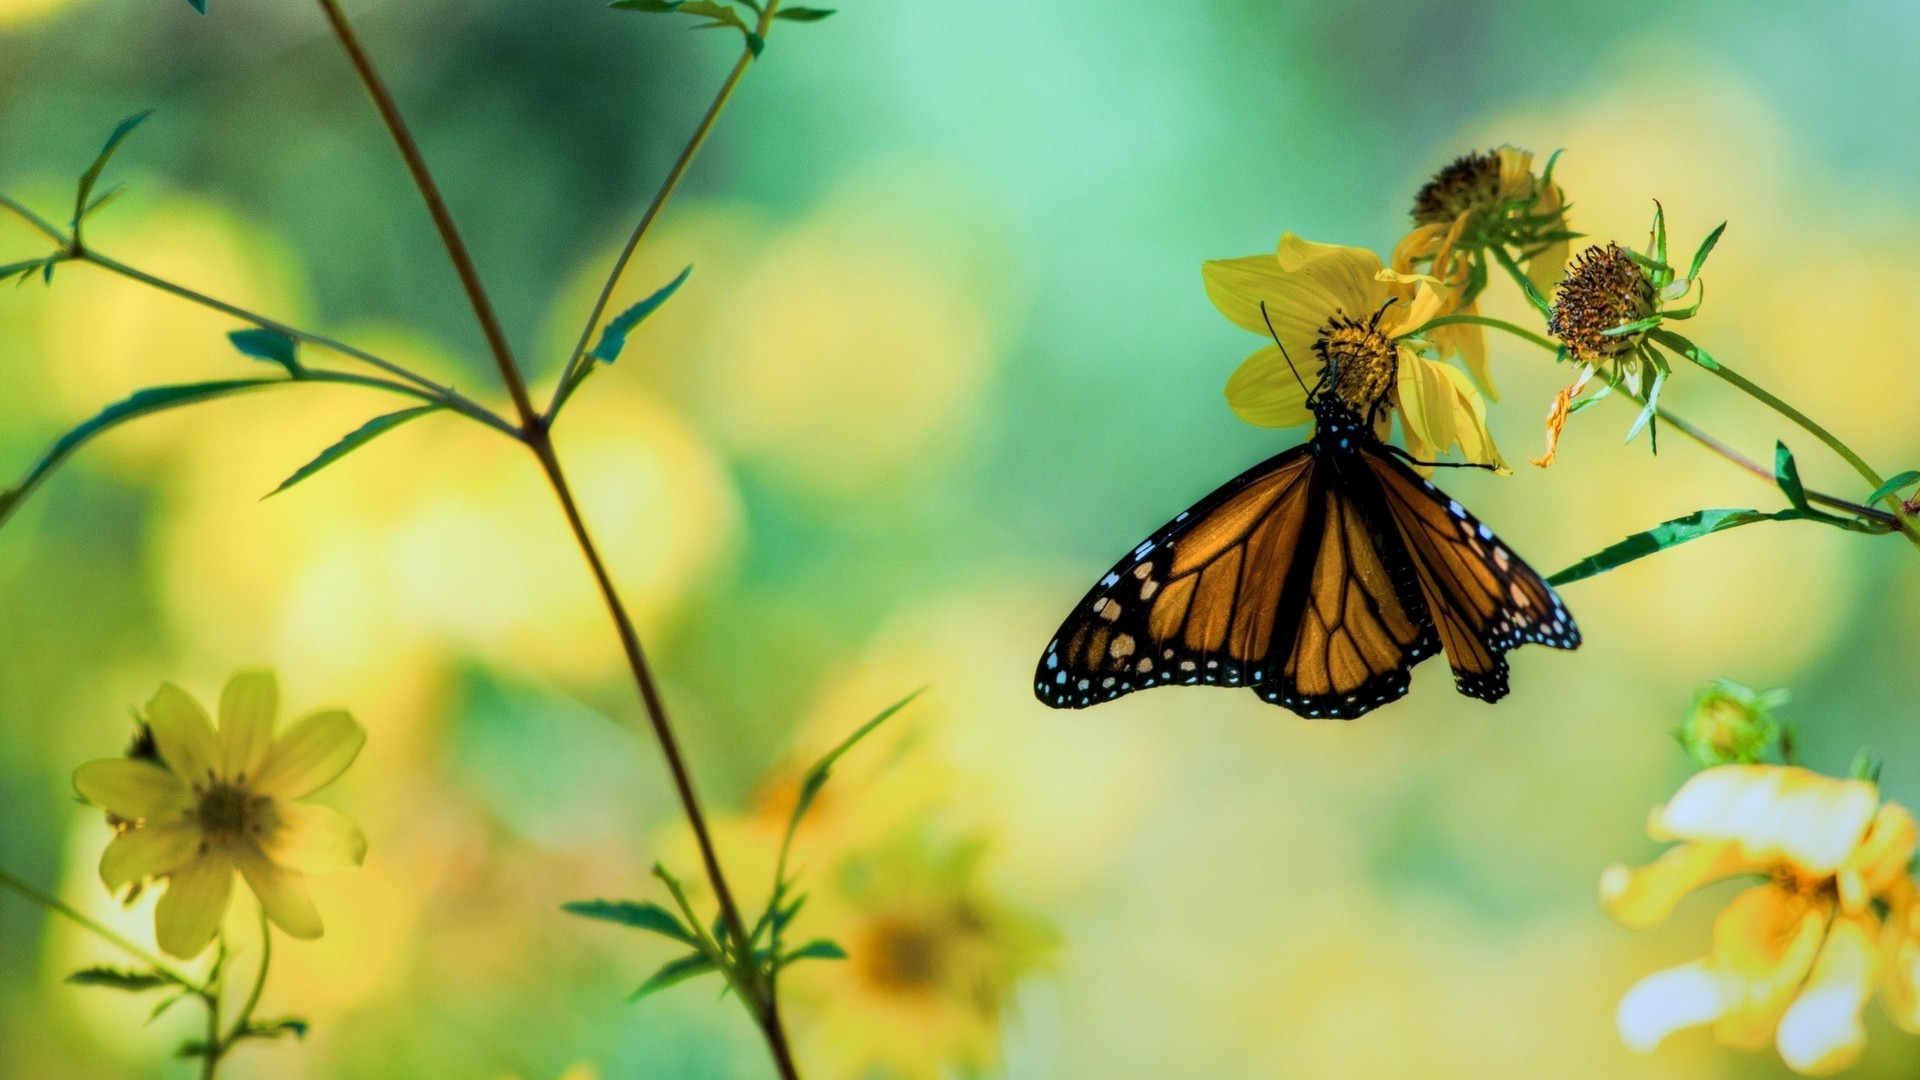 Wallpaper Butterfly Pictures Resolution 1920x1080